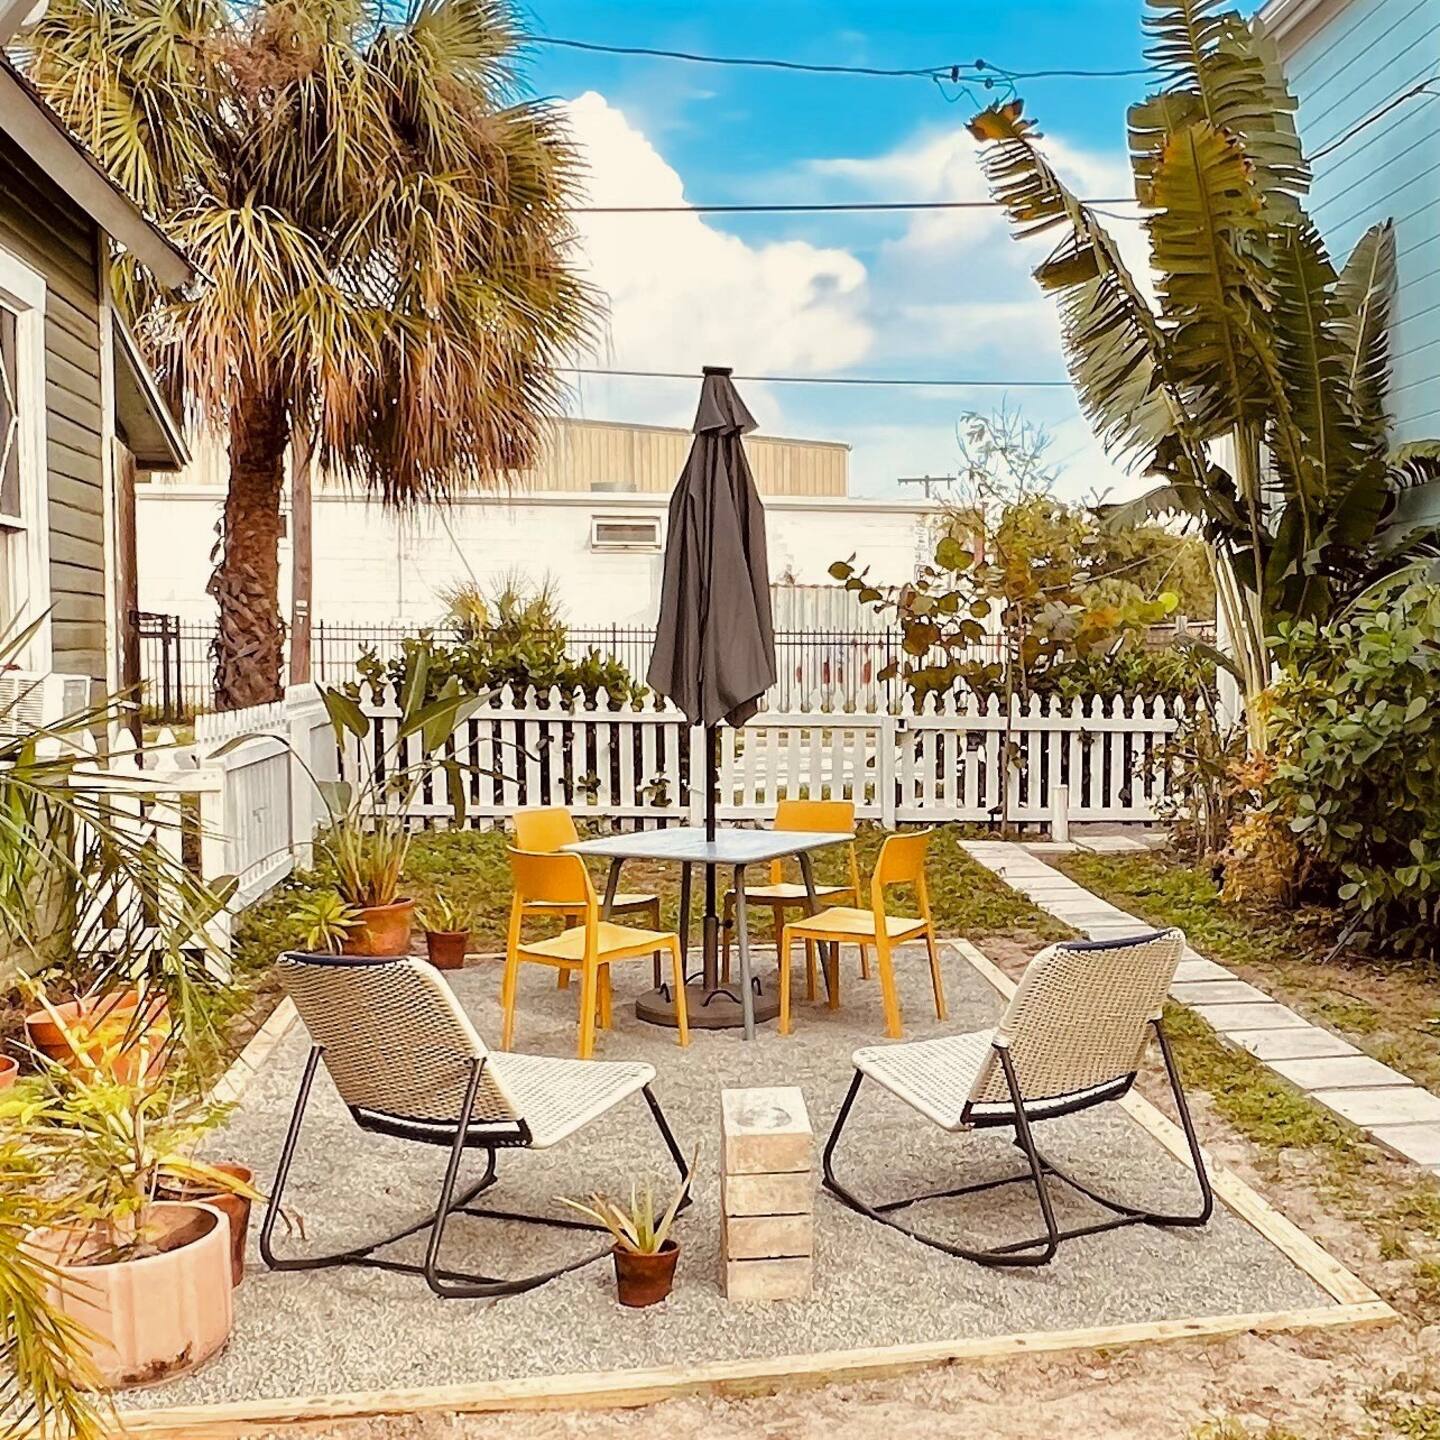 Backyard with palm trees and four yellow chairs, on the sand